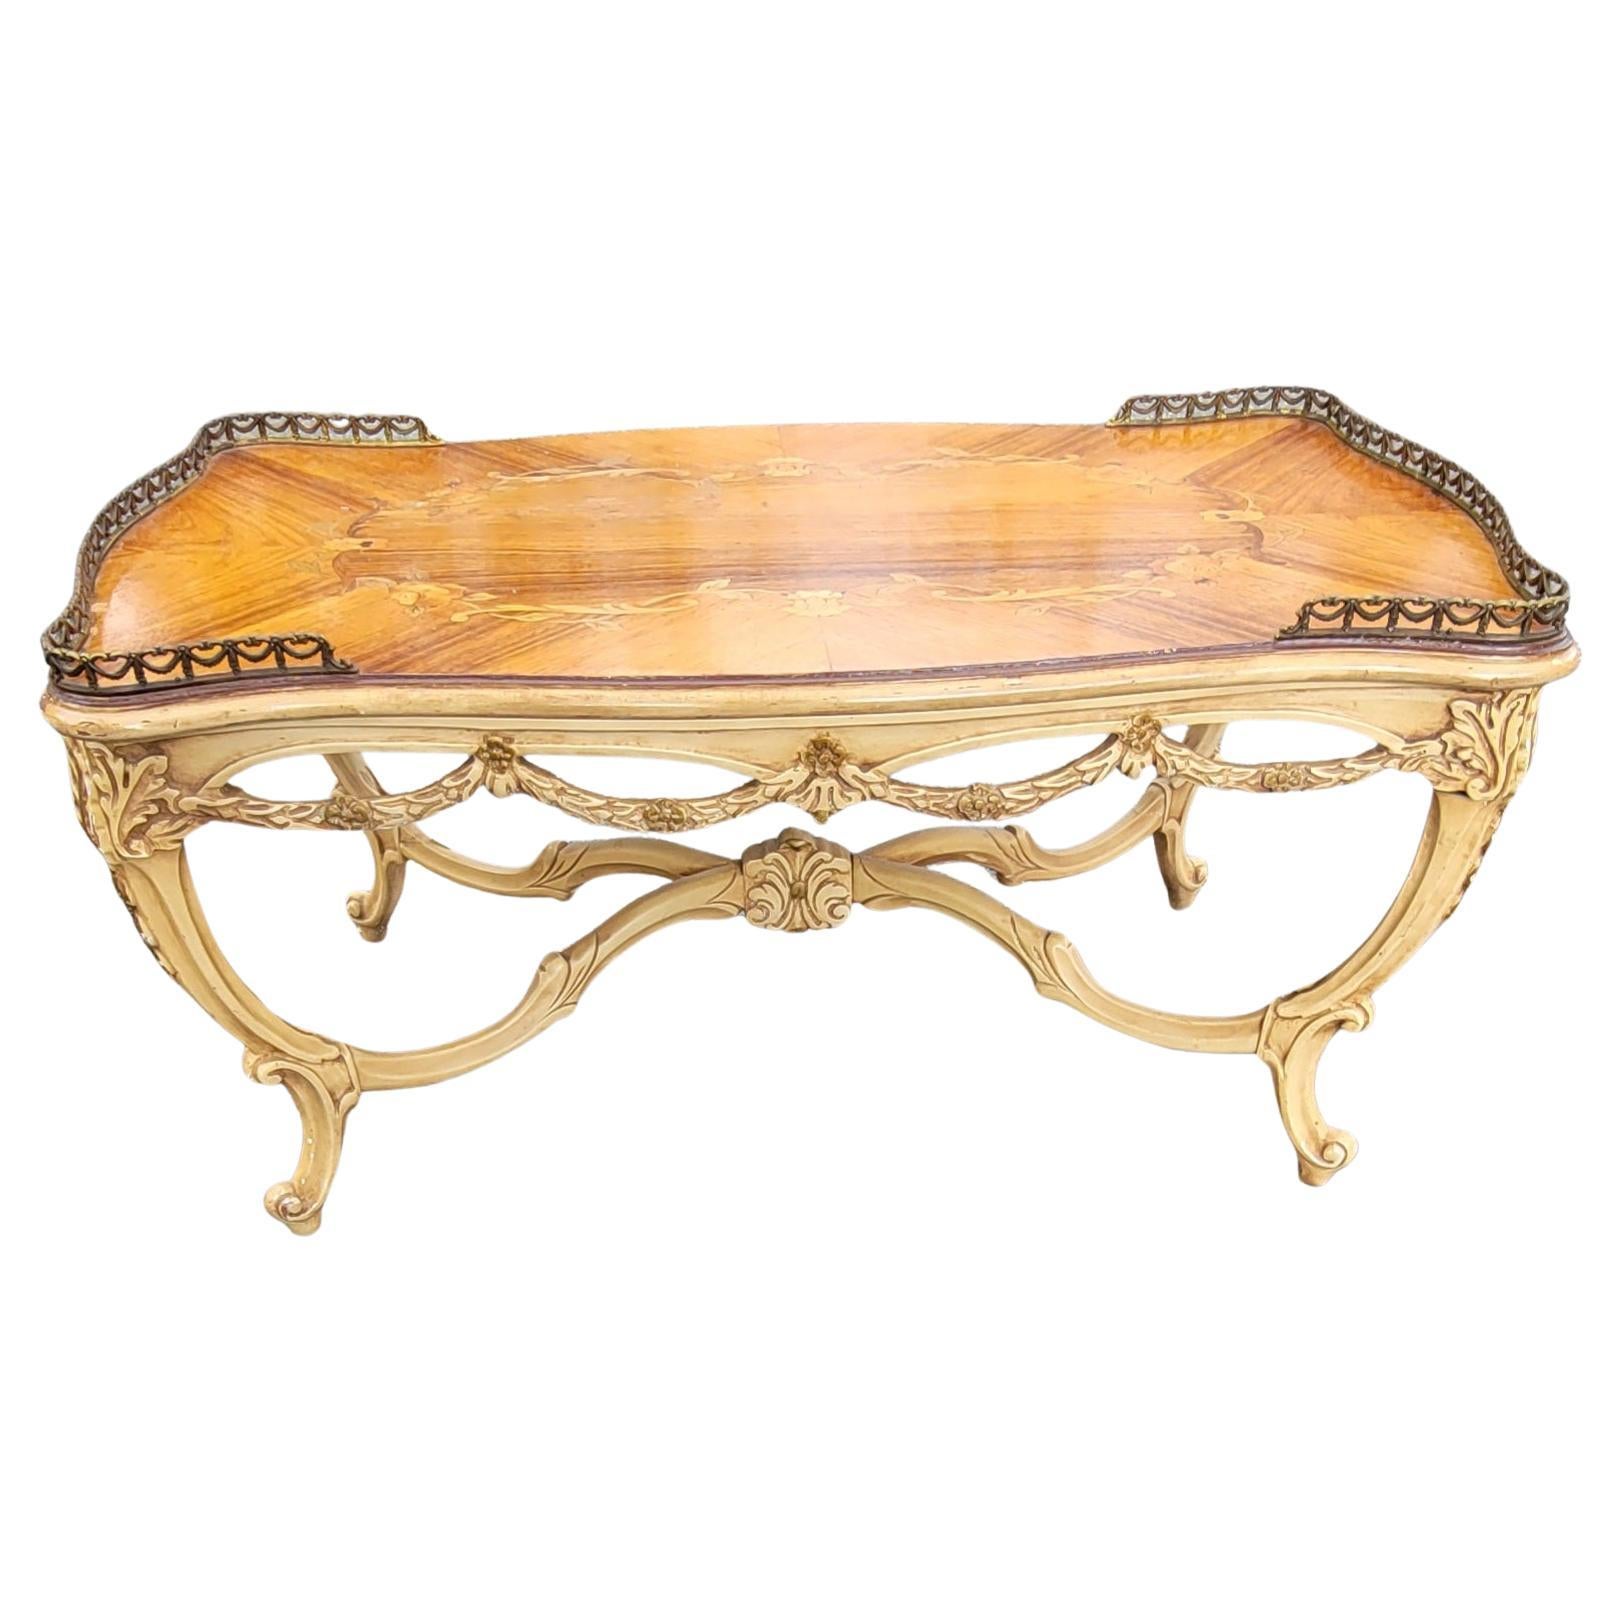 1910s Louis XV Walnut & Kingwood Marquetry Satinwood Inlaid Cocktail Table For Sale